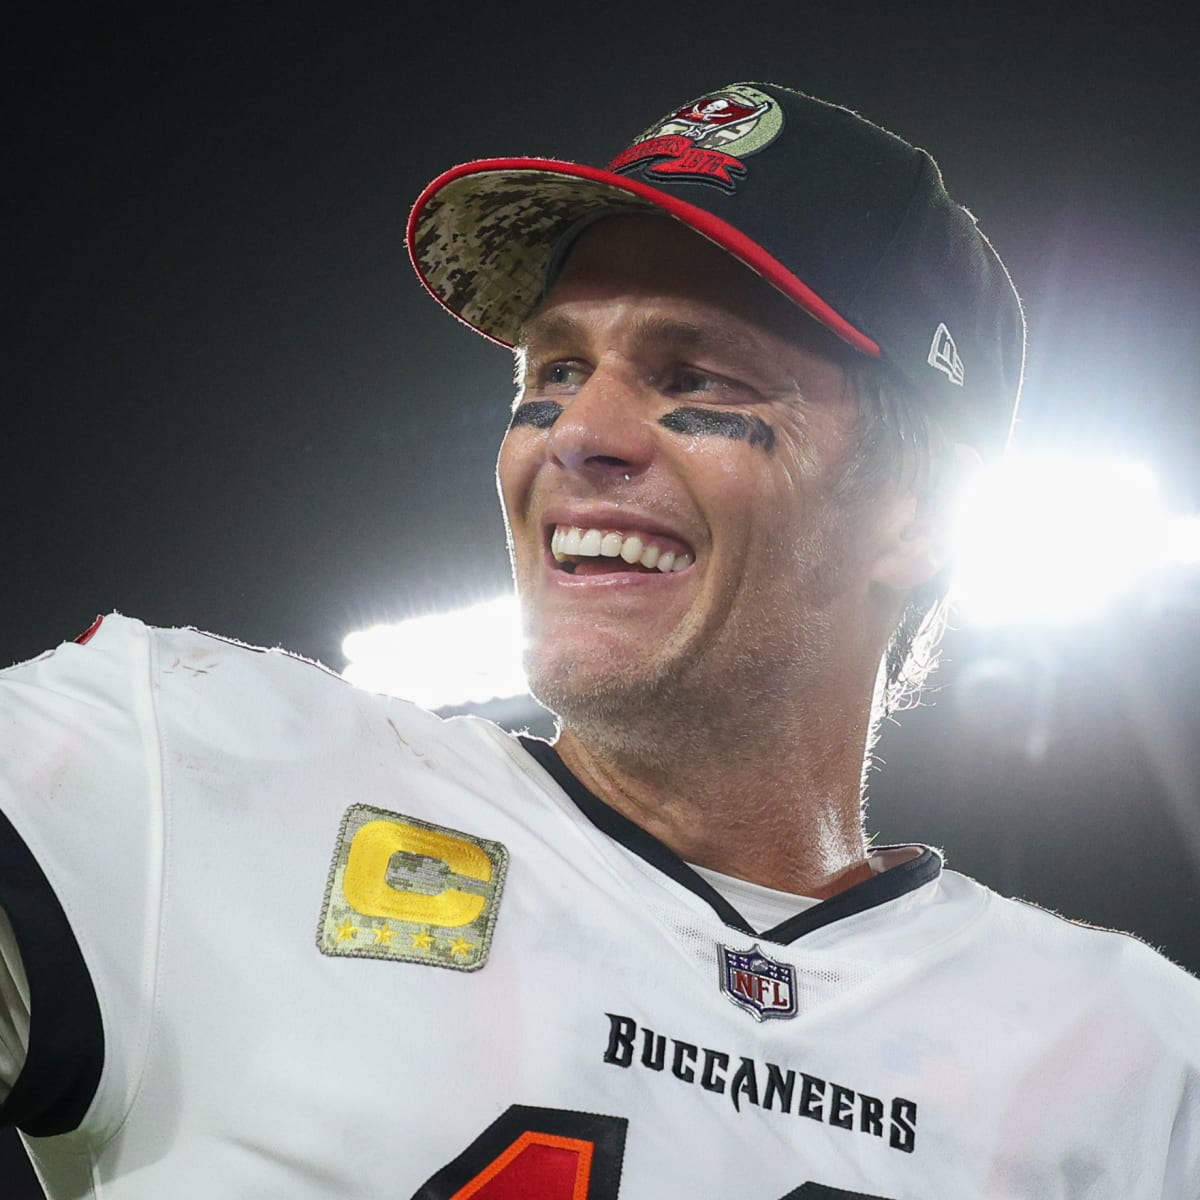 Tom Brady fires back at speculation he'll ditch Buccaneers during season